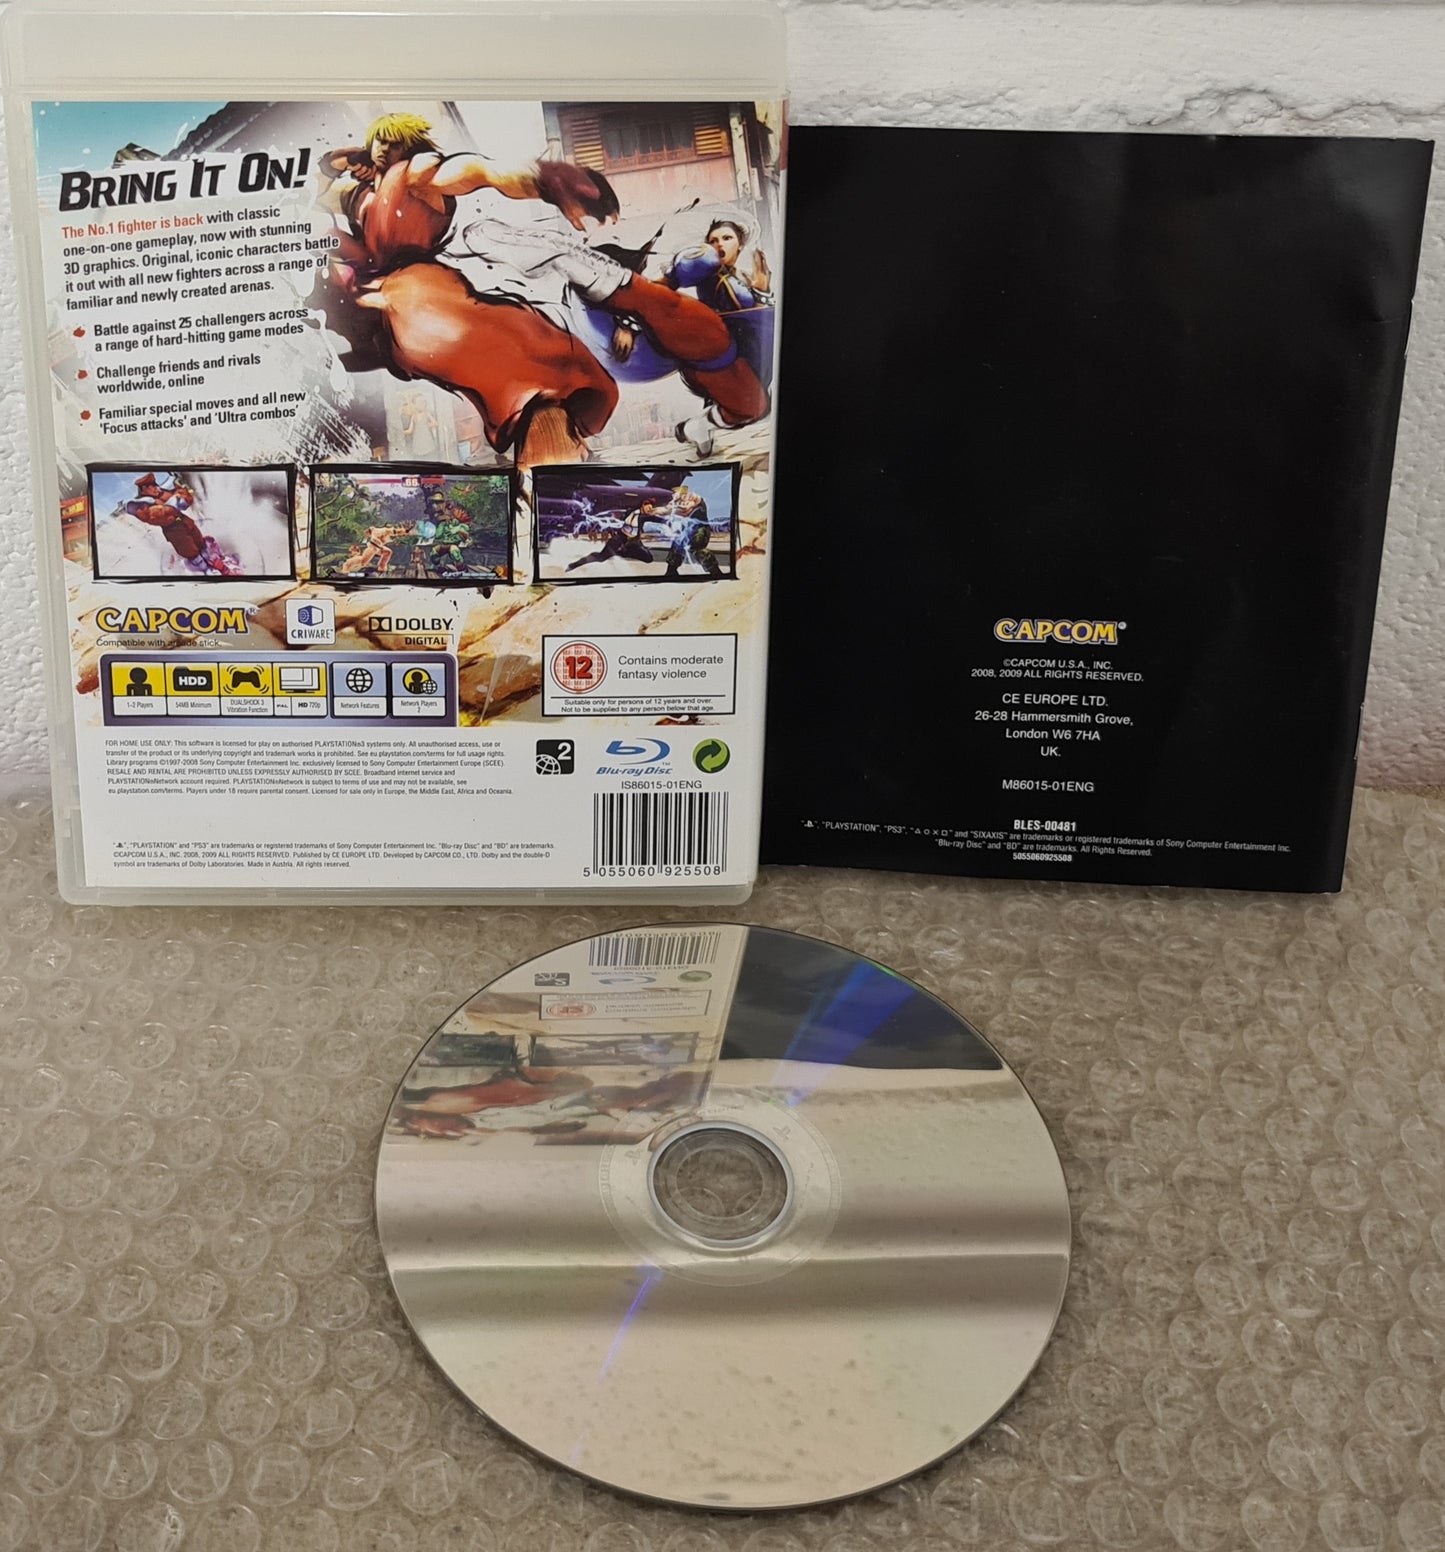 Street Fighter IV Sony Playstation 3 (PS3) Game